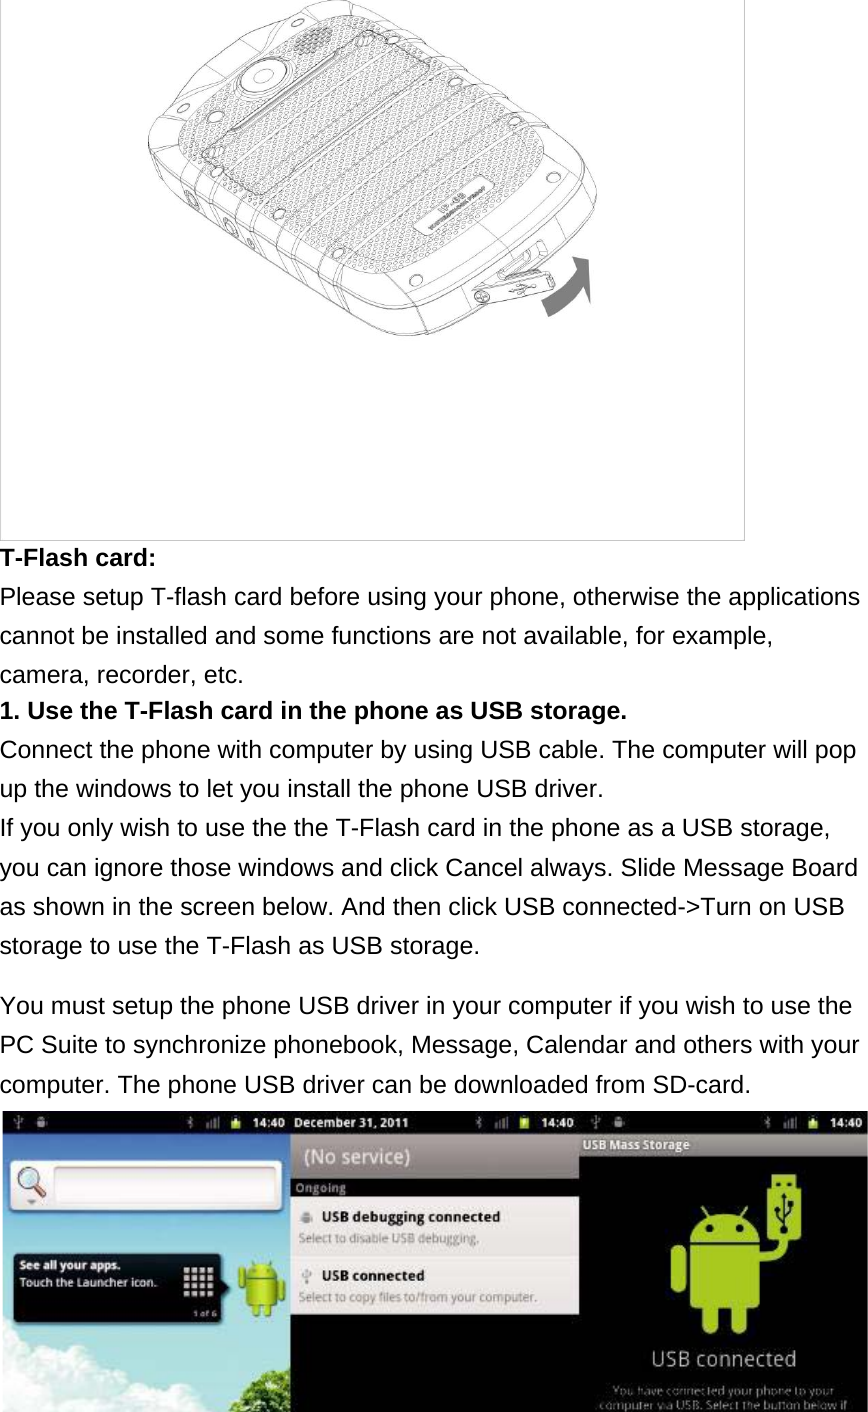 T-Flash card:  Please setup T-flash card before using your phone, otherwise the applications cannot be installed and some functions are not available, for example, camera, recorder, etc.  1. Use the T-Flash card in the phone as USB storage.  Connect the phone with computer by using USB cable. The computer will pop up the windows to let you install the phone USB driver.  If you only wish to use the the T-Flash card in the phone as a USB storage, you can ignore those windows and click Cancel always. Slide Message Board as shown in the screen below. And then click USB connected-&gt;Turn on USB storage to use the T-Flash as USB storage.  You must setup the phone USB driver in your computer if you wish to use the PC Suite to synchronize phonebook, Message, Calendar and others with your computer. The phone USB driver can be downloaded from SD-card.     